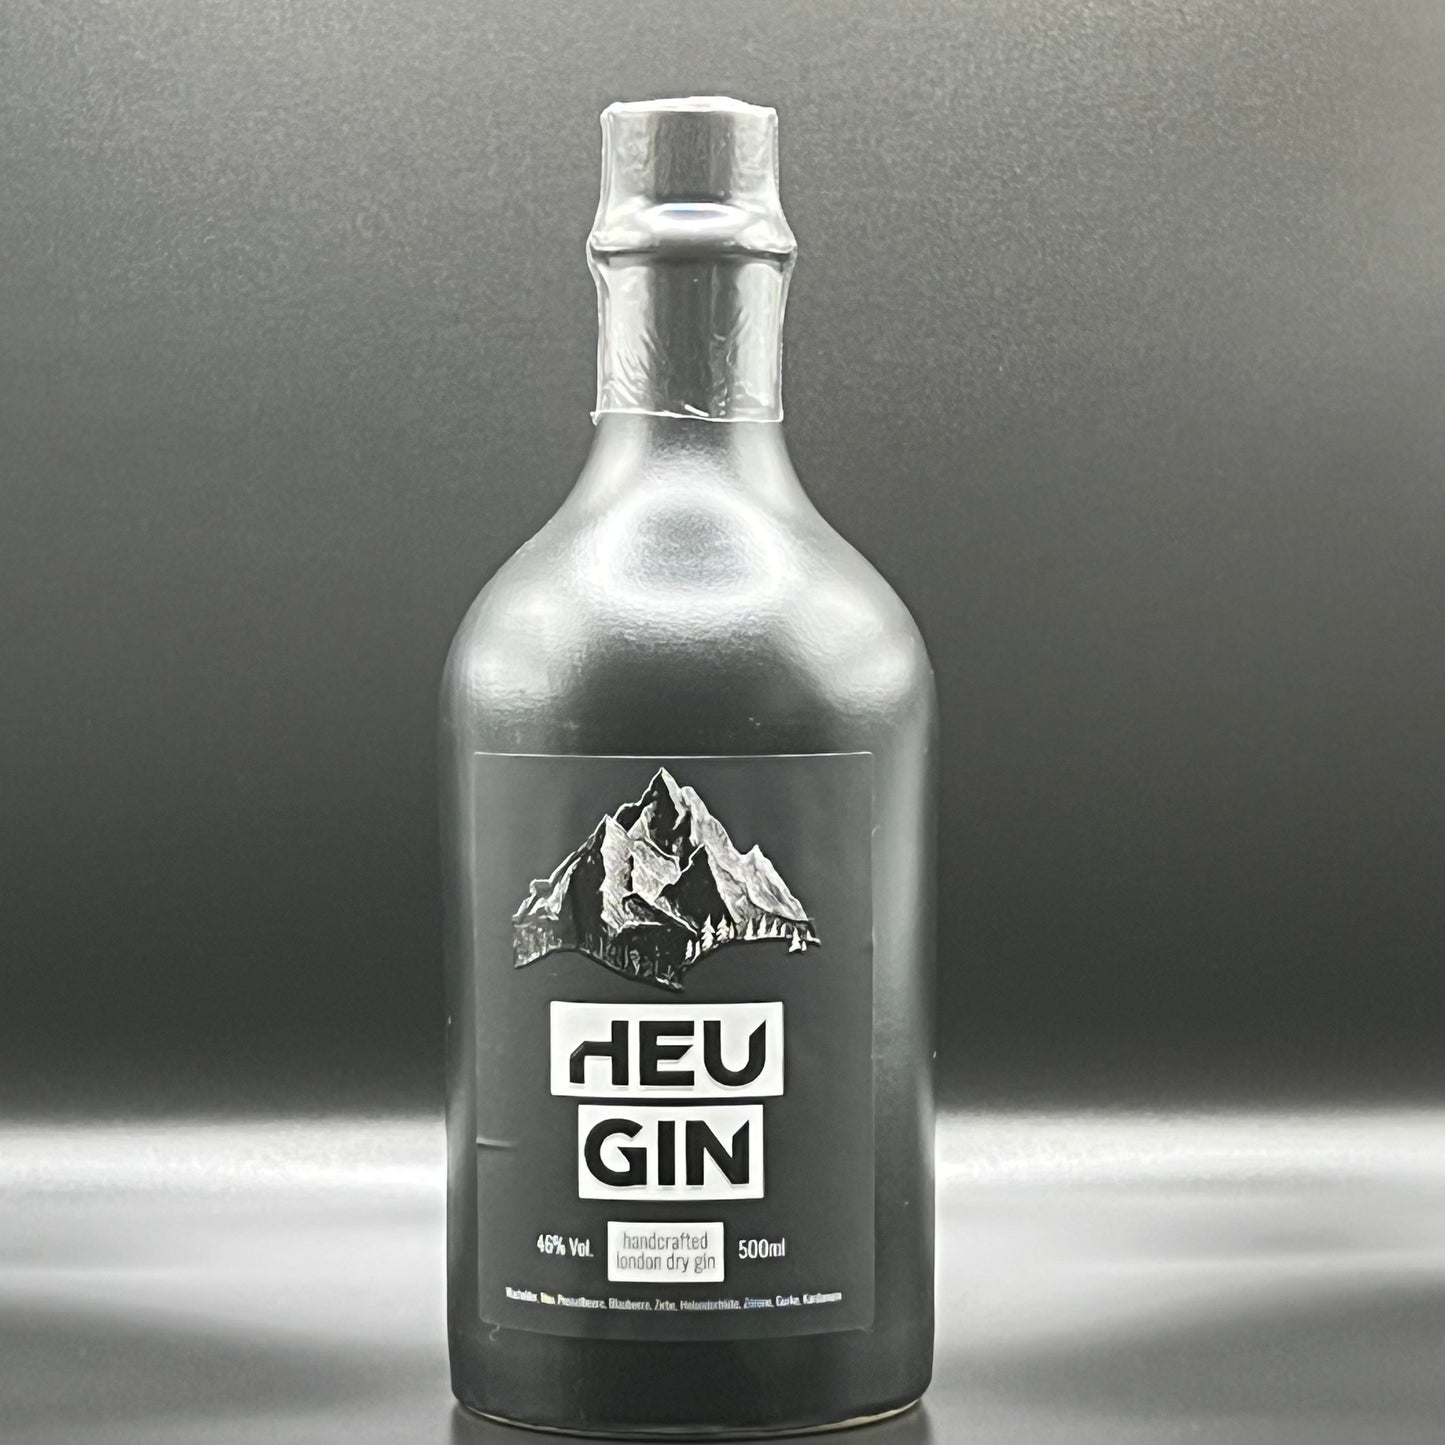 HeuGin rollout edition - Tonflasche 50cl